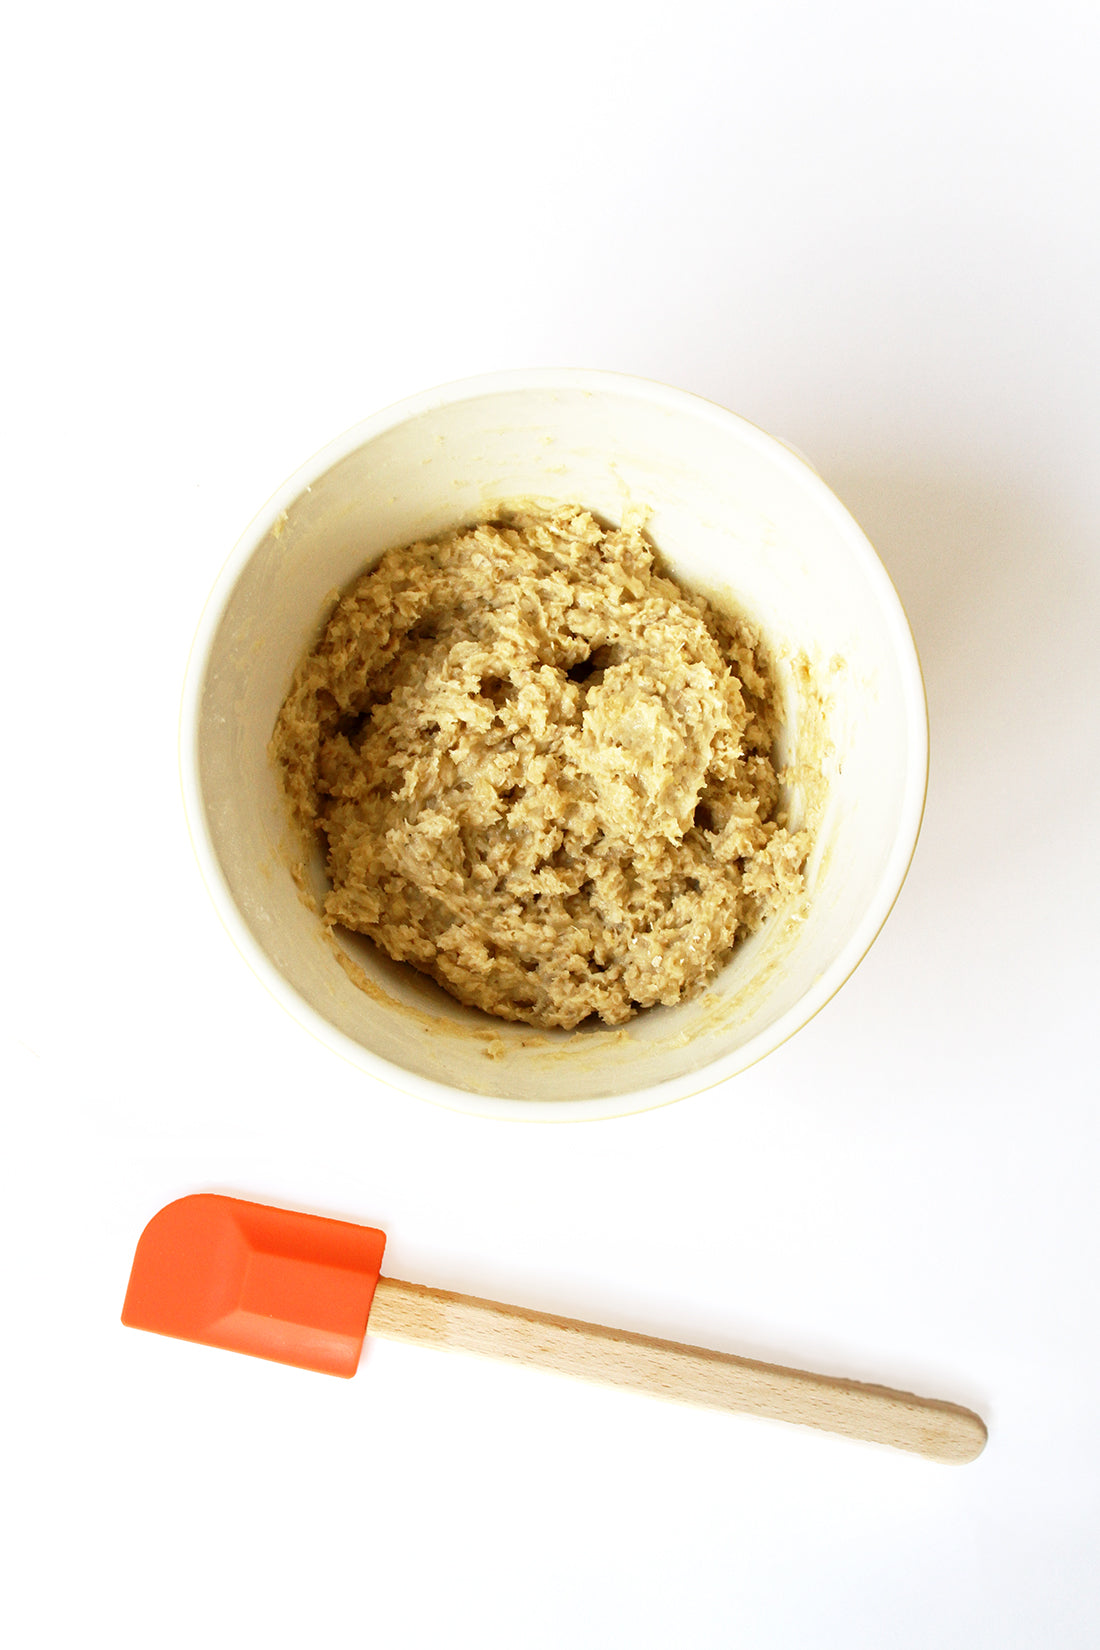 Image of the top of a bowl with Miss Jones Baking Co Ginger Oatmeal Drop Cookies dough next to an orange spatula